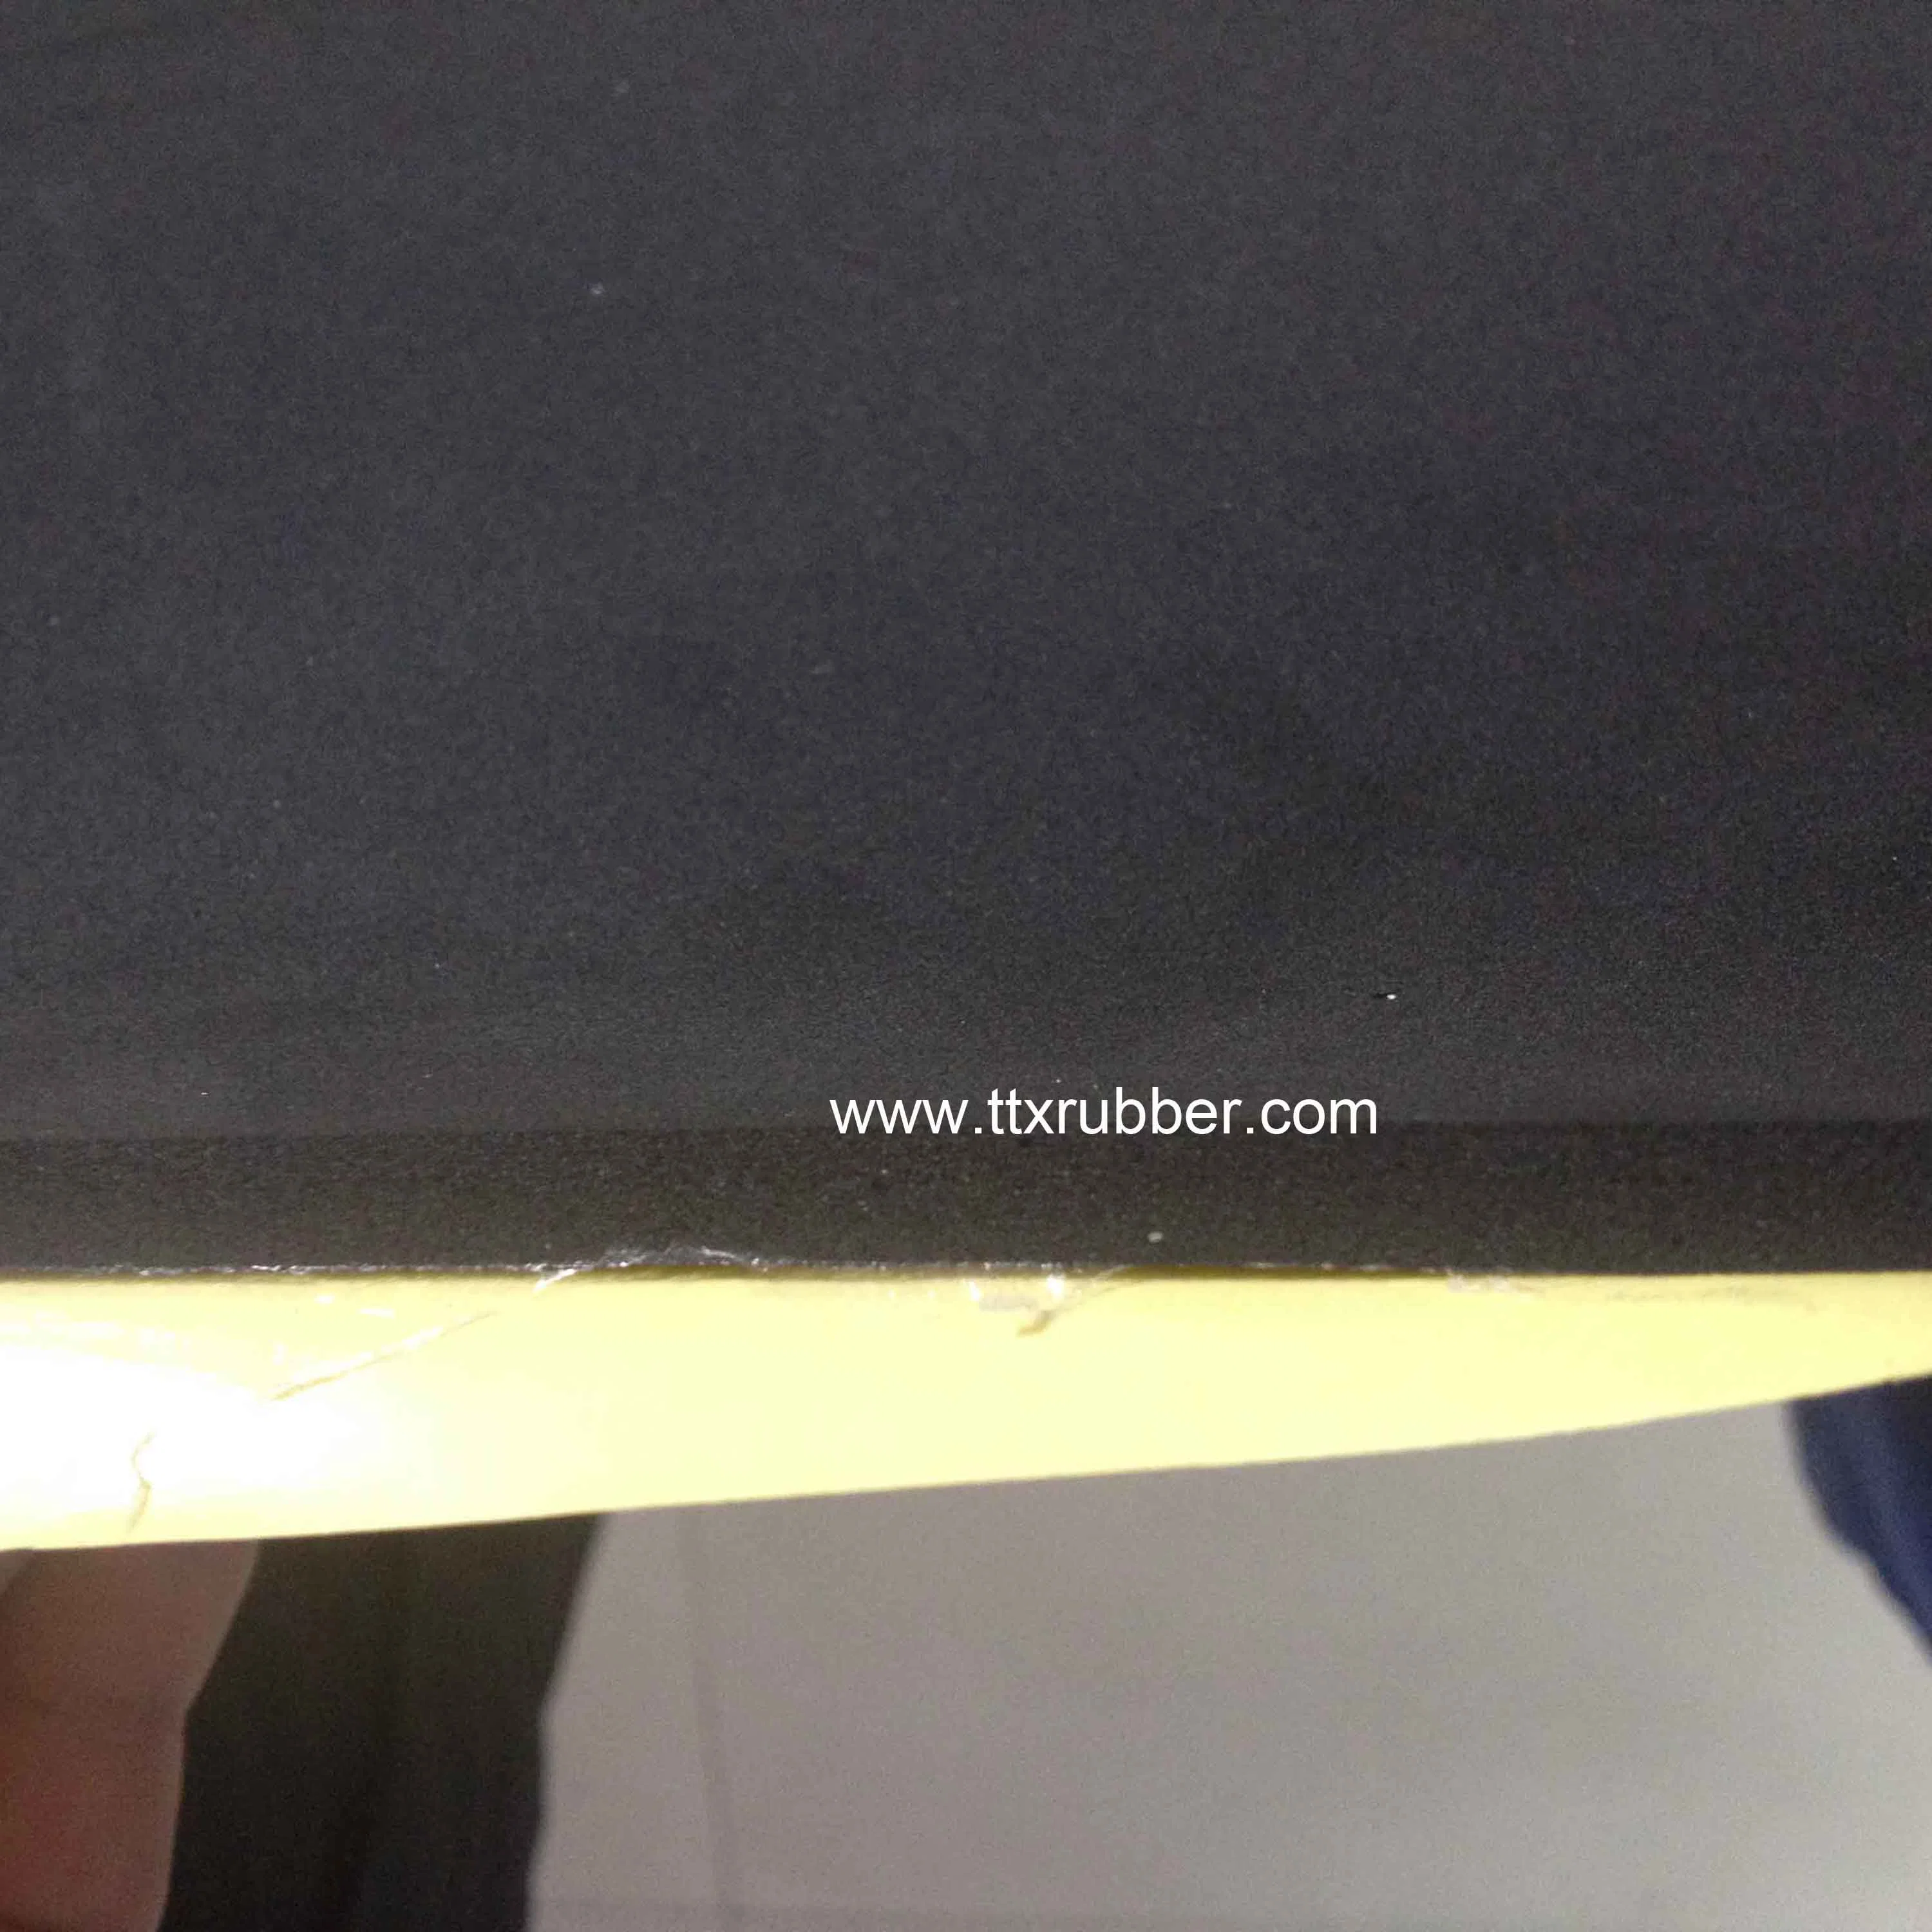 Closed Cell Rubber Sponge Mouse Pad Material